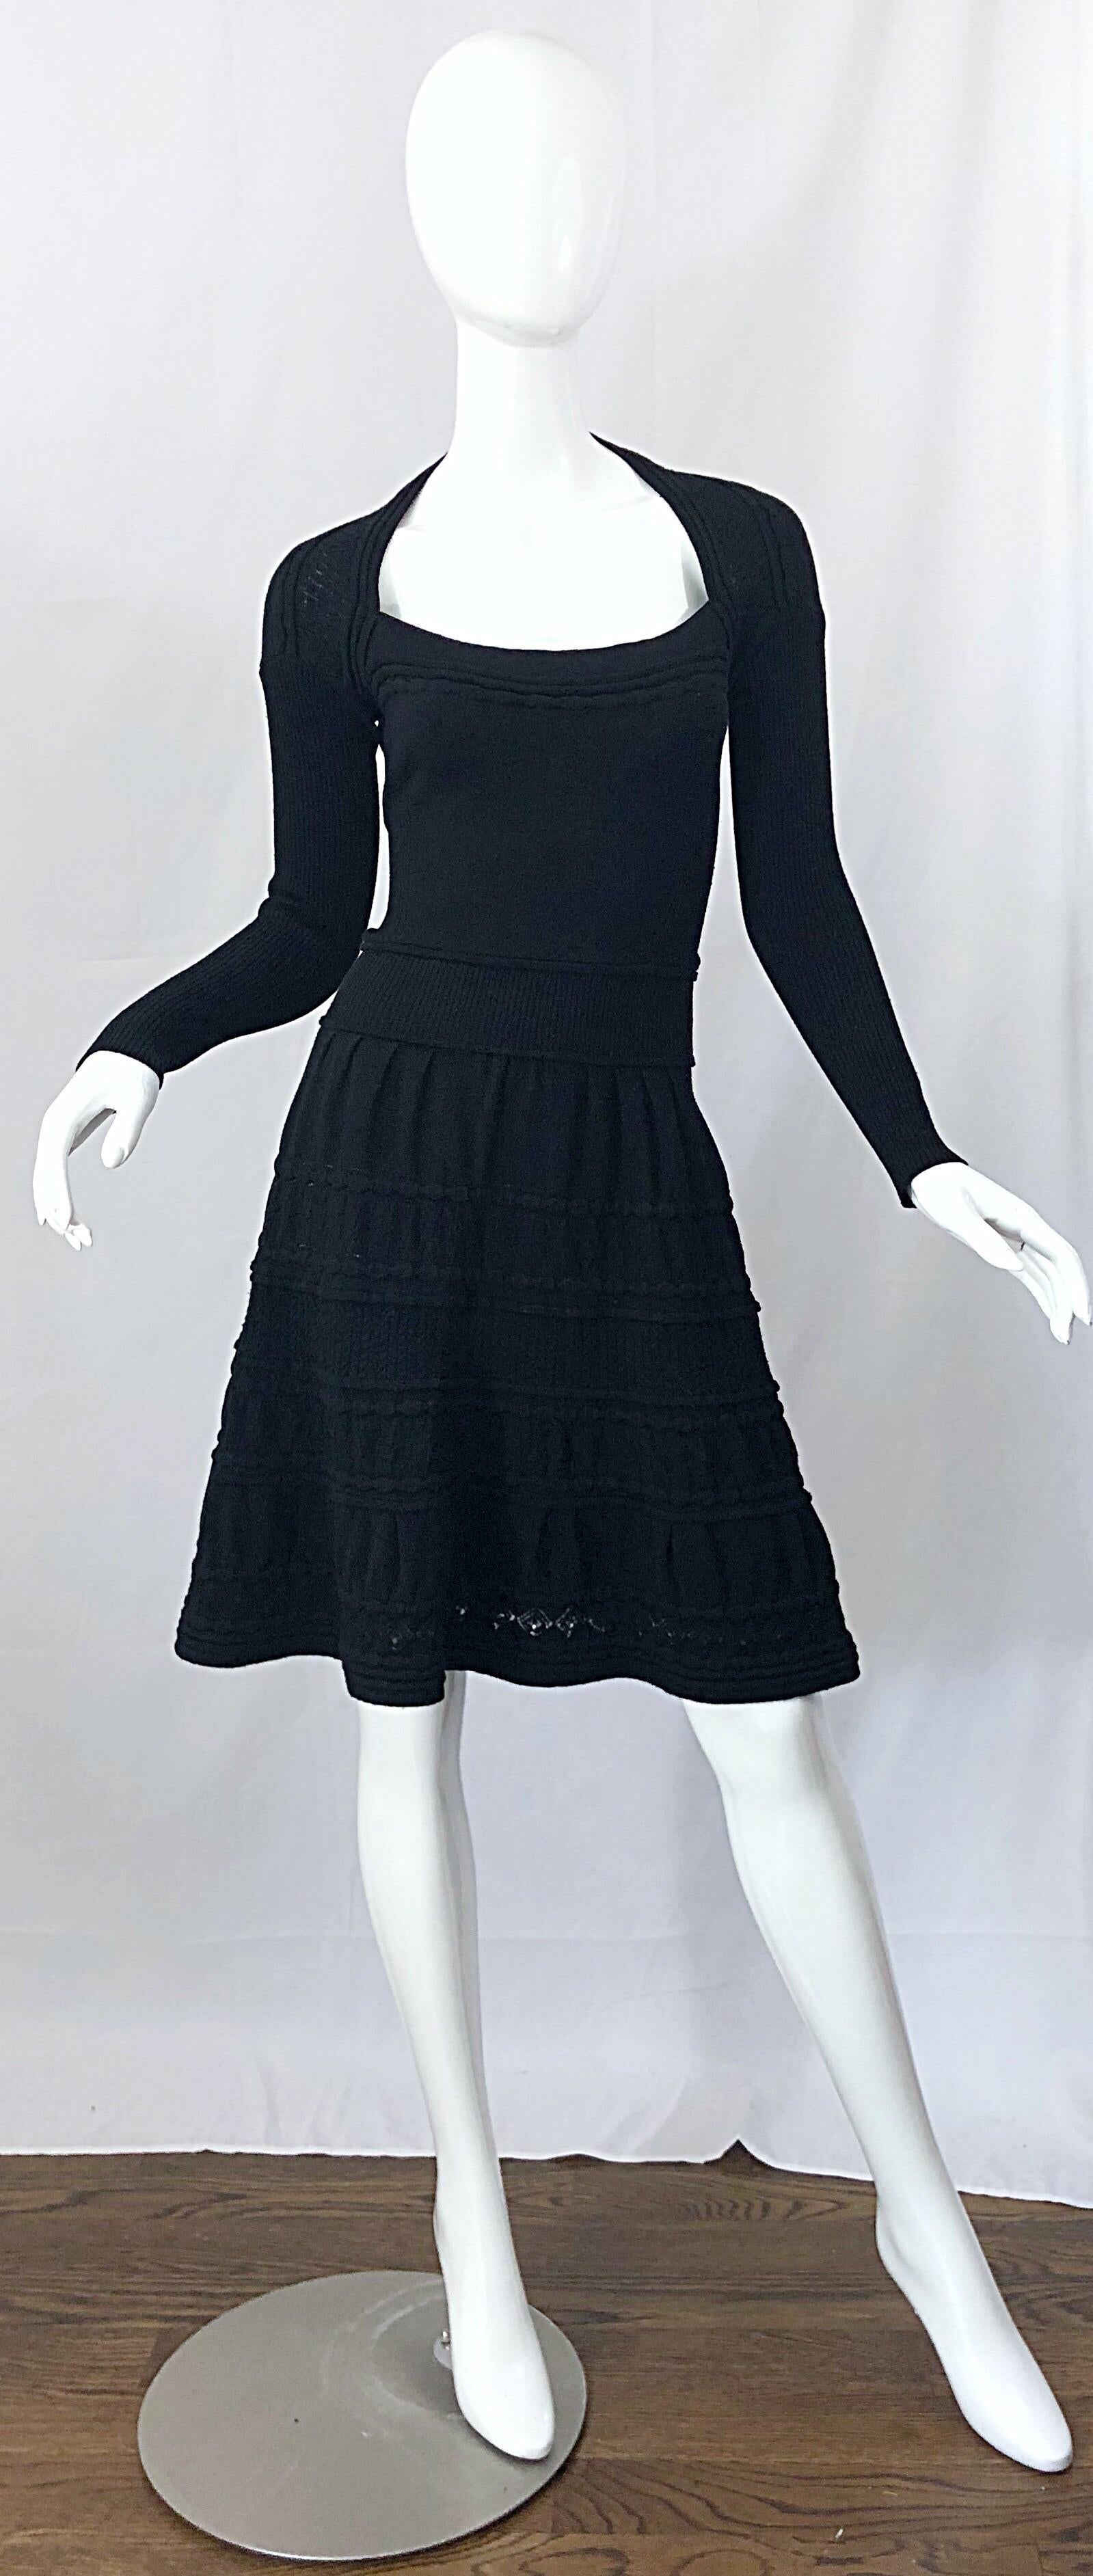 Brand new with tags D. EXTERIOR Italian made black crochet lightweight wool long sleeve skater dress! Super soft lightweight Italian wool that stretches to fit. 
Features a scoop neck bodice with sleek long sleeves and a tailored bodice. Flattering